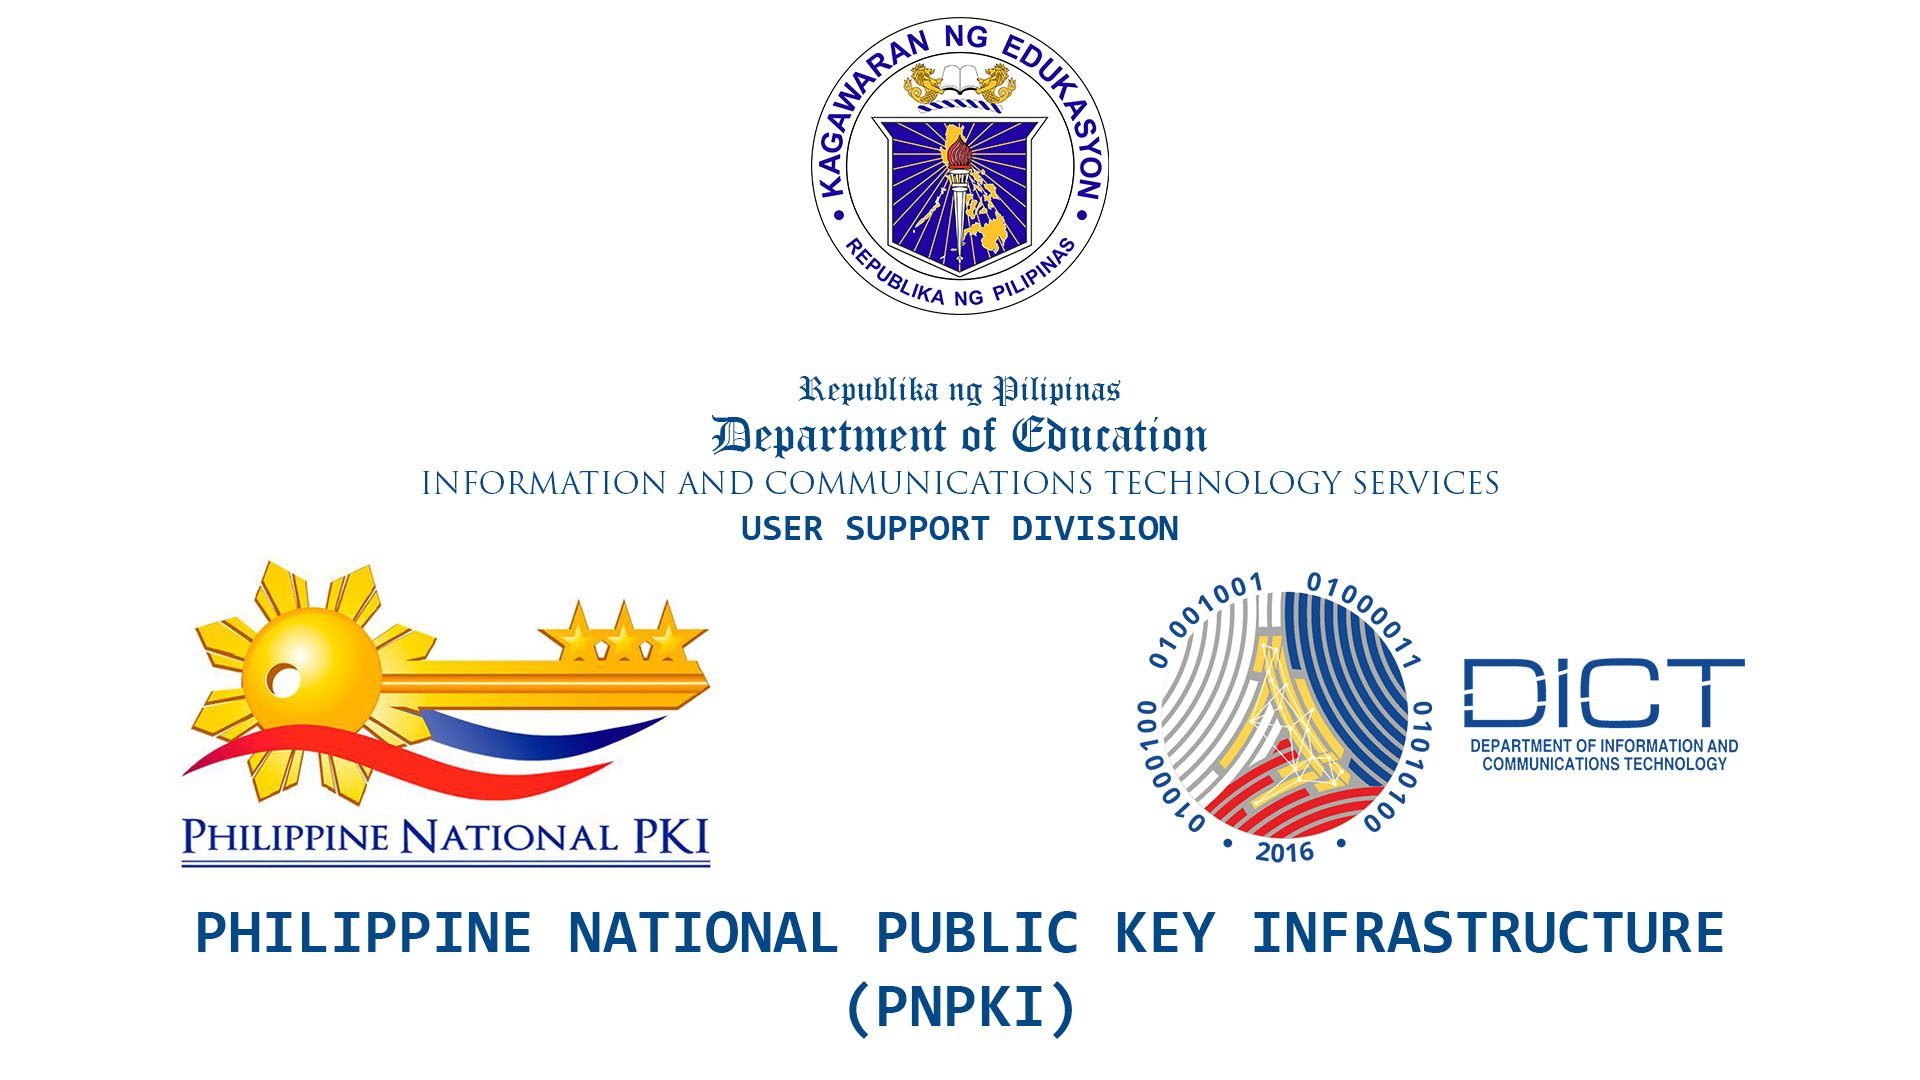 Iloilo 3rd Congressional District - Facility for the Submission of the Application Requirement for the PNPKI Digital Certificate of DepEd Personnel in the Field Offices